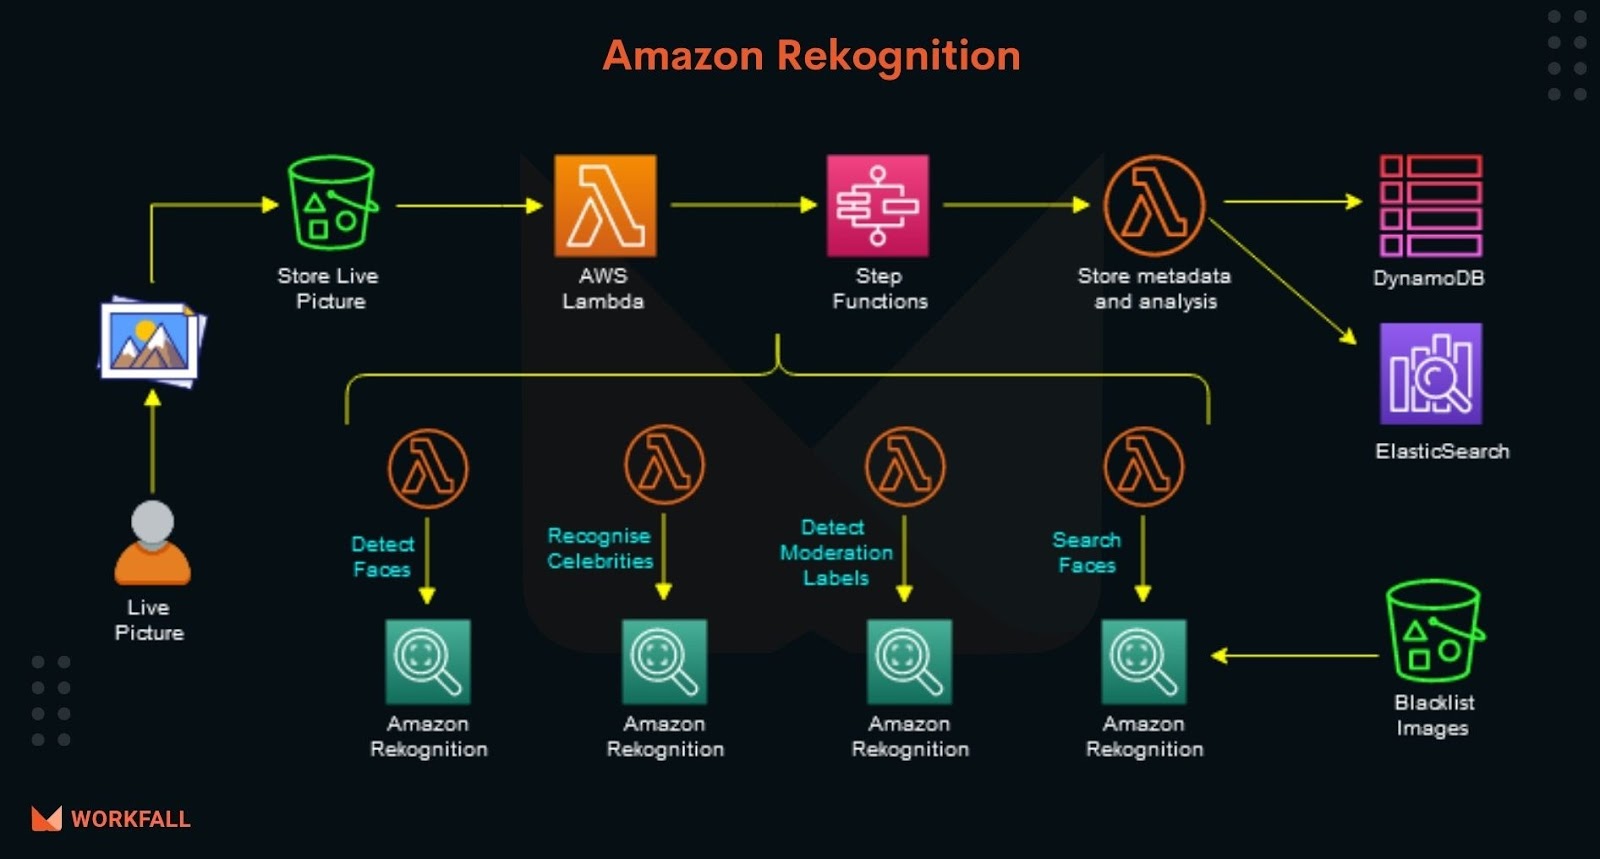 How to detect, analyze, and compare faces with Amazon Rekognition? - The  Workfall Blog